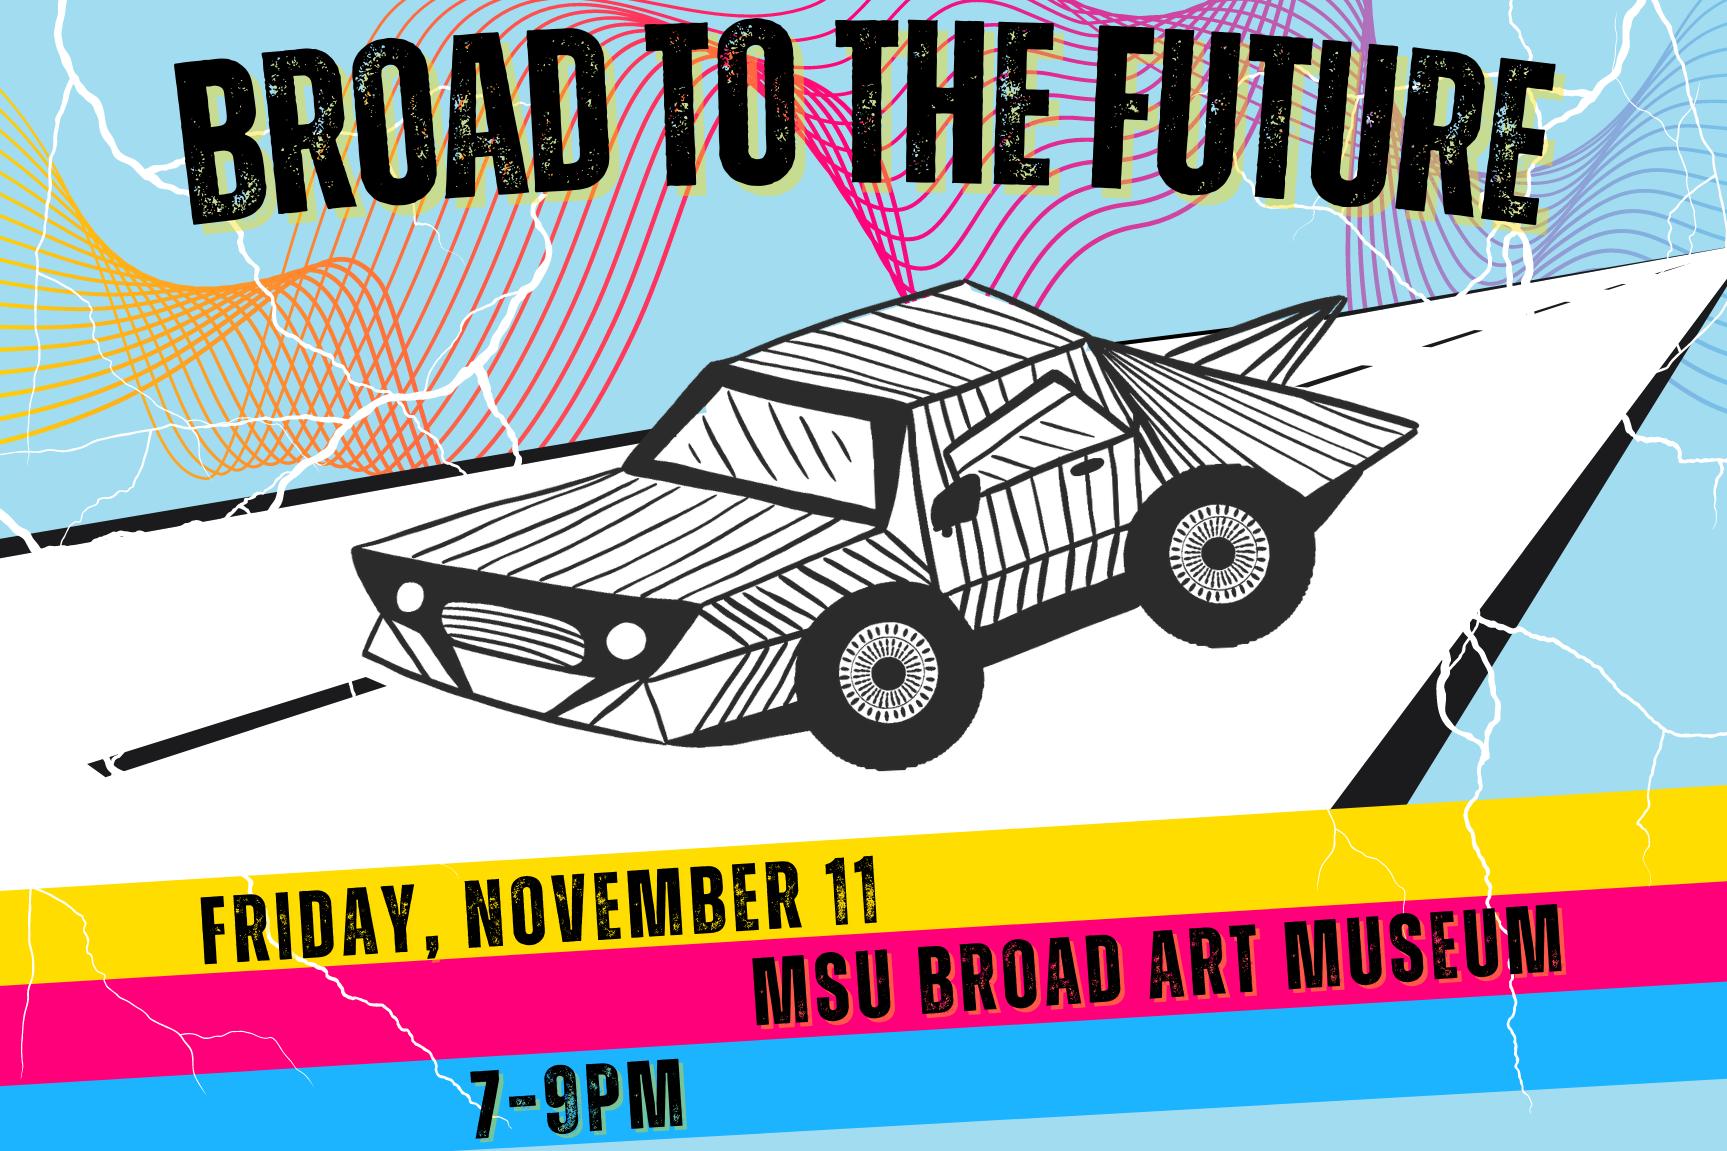 Illustration of a car shaped like the MSU Broad Art Museum, lightning bolts, and text reading "Broad to the Future"